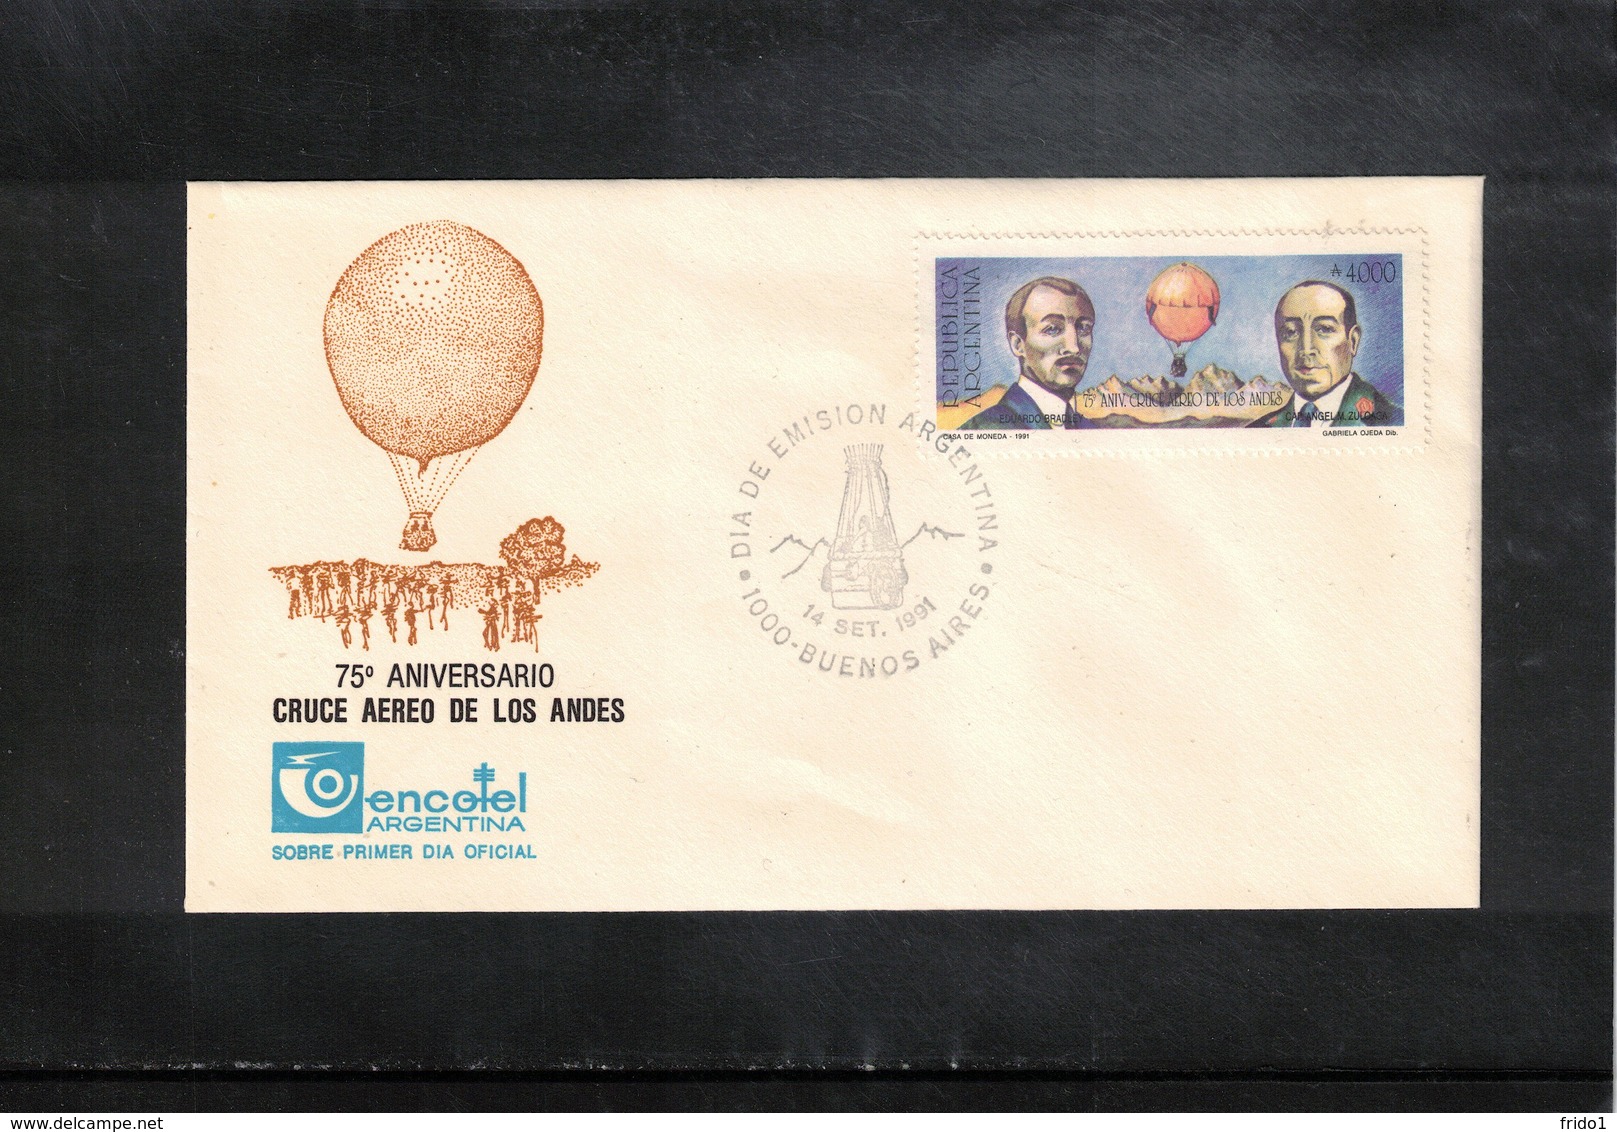 Argentina 1991 75th Anniversary Of The First Balloon Crossing Of Andes Interesting Cover - Covers & Documents